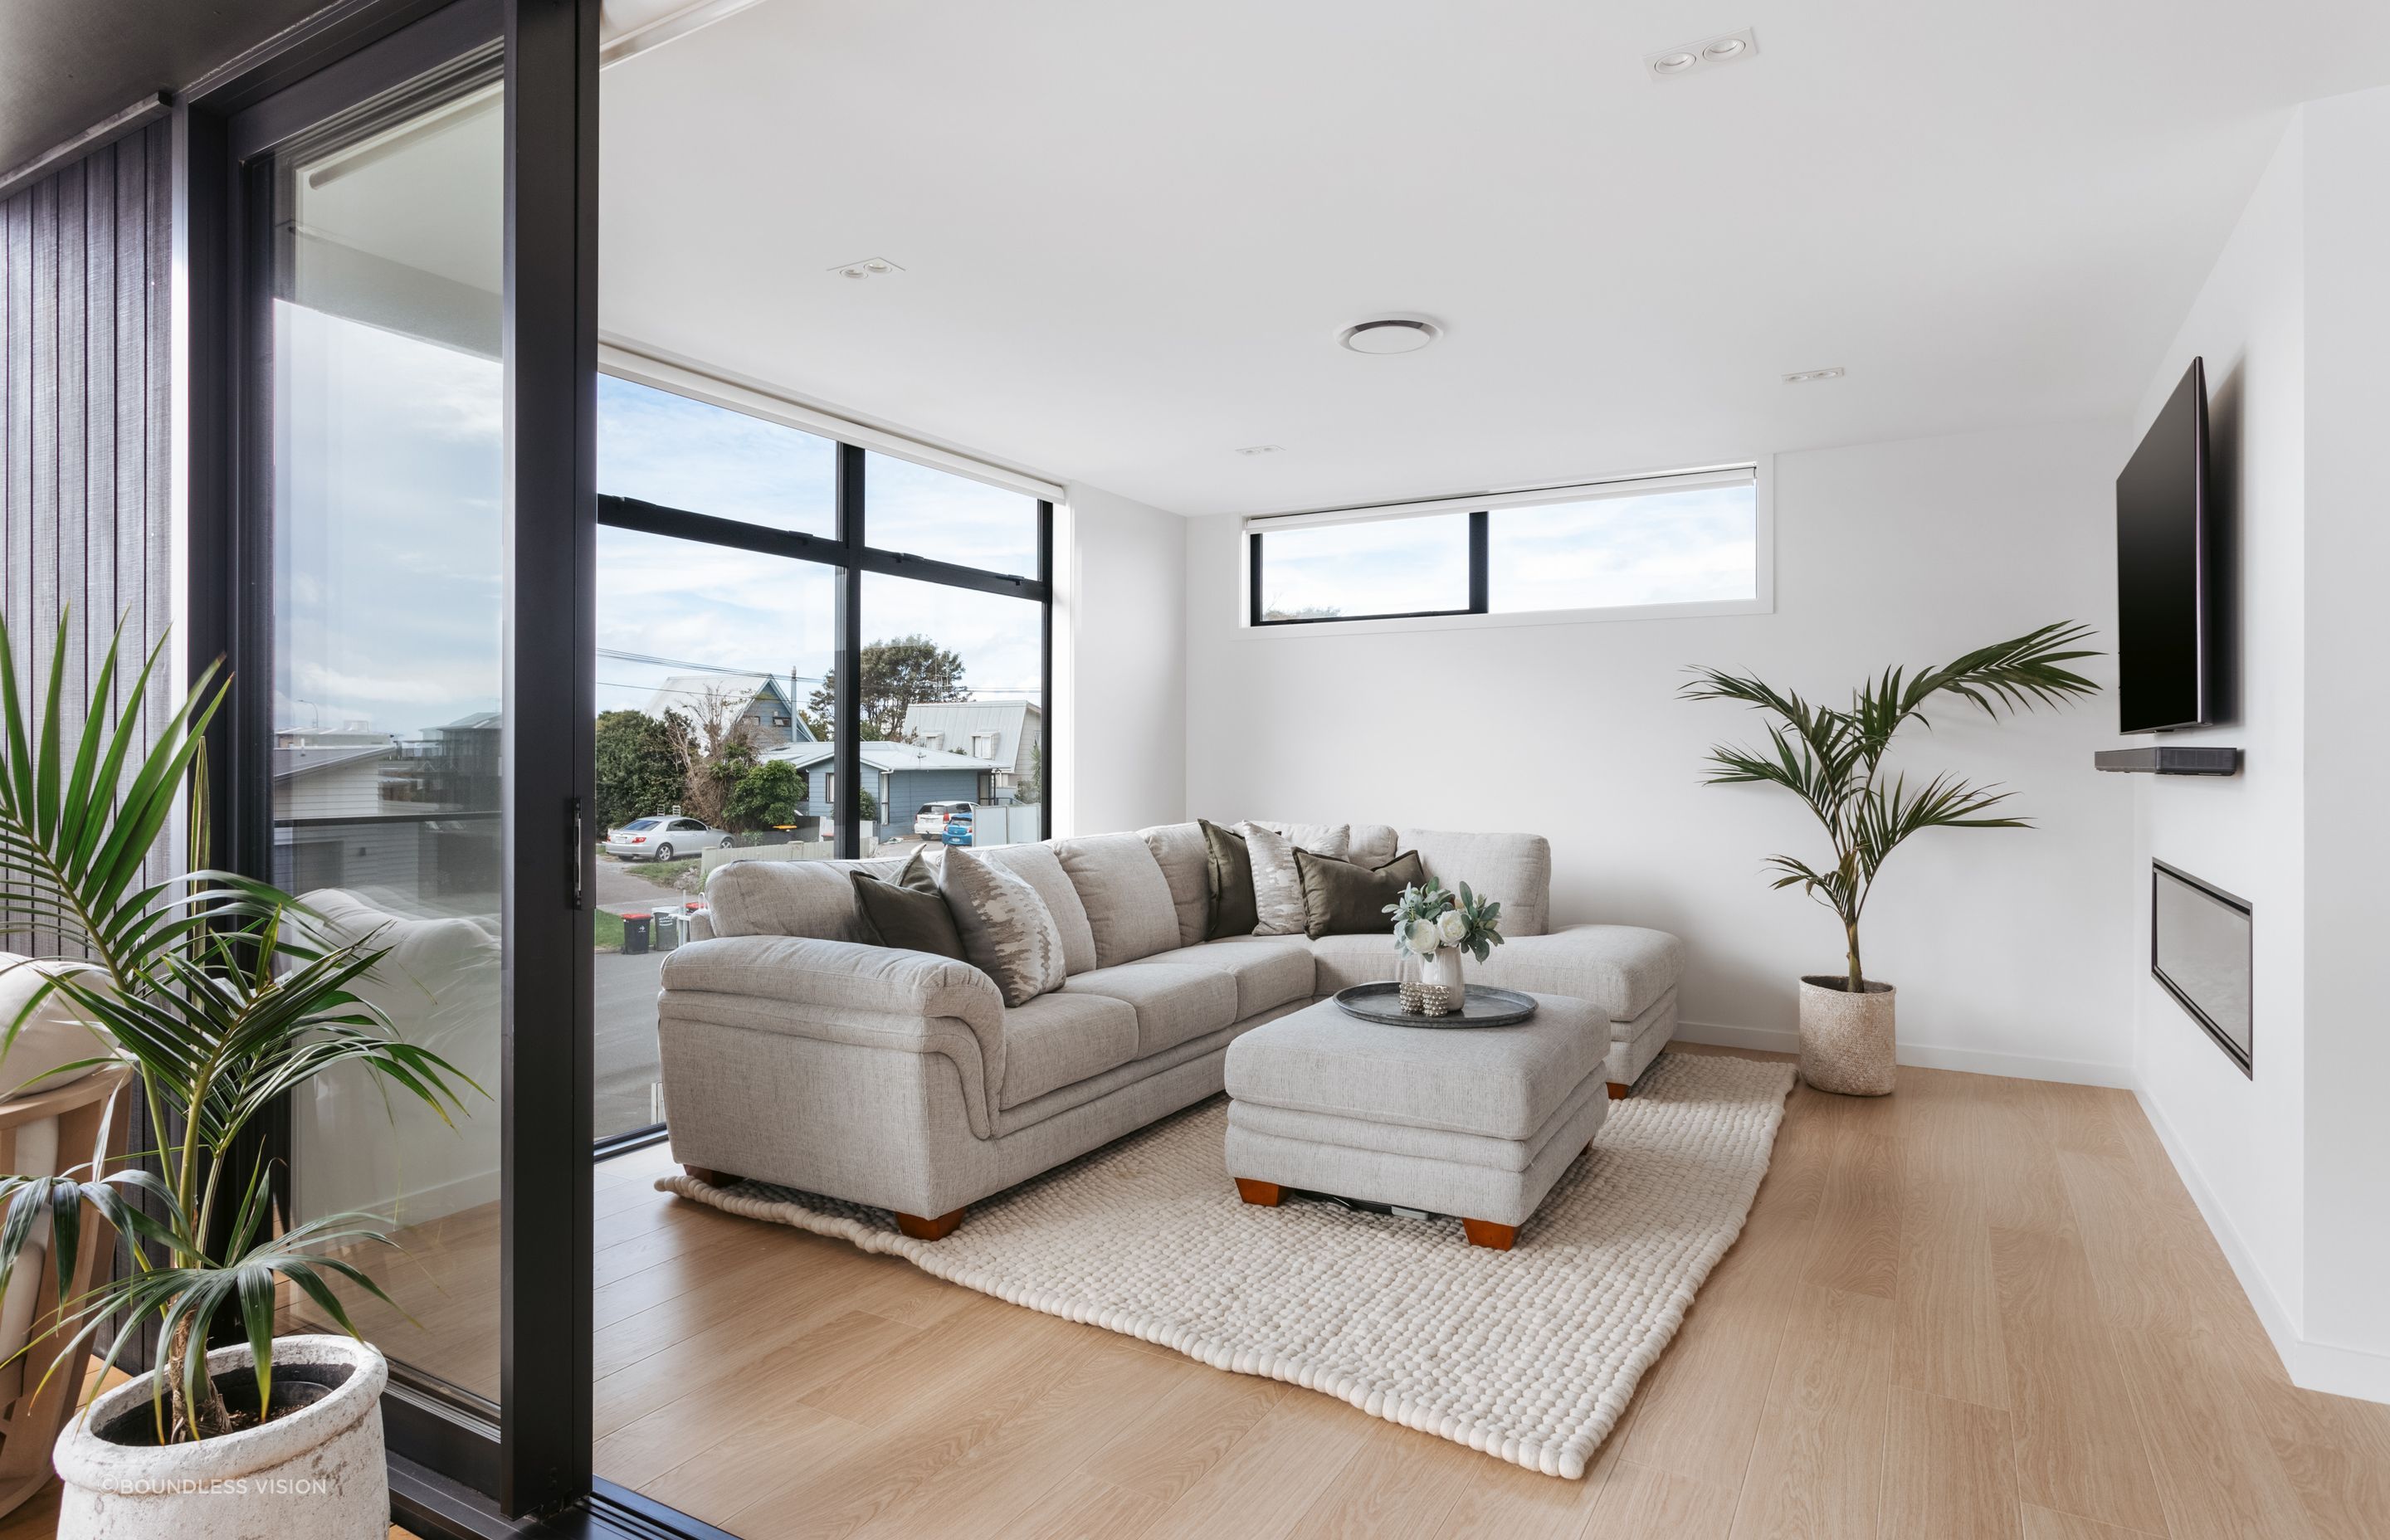 A clever floorpan enables the lounge area to be both private, and connected to the rest of the space.